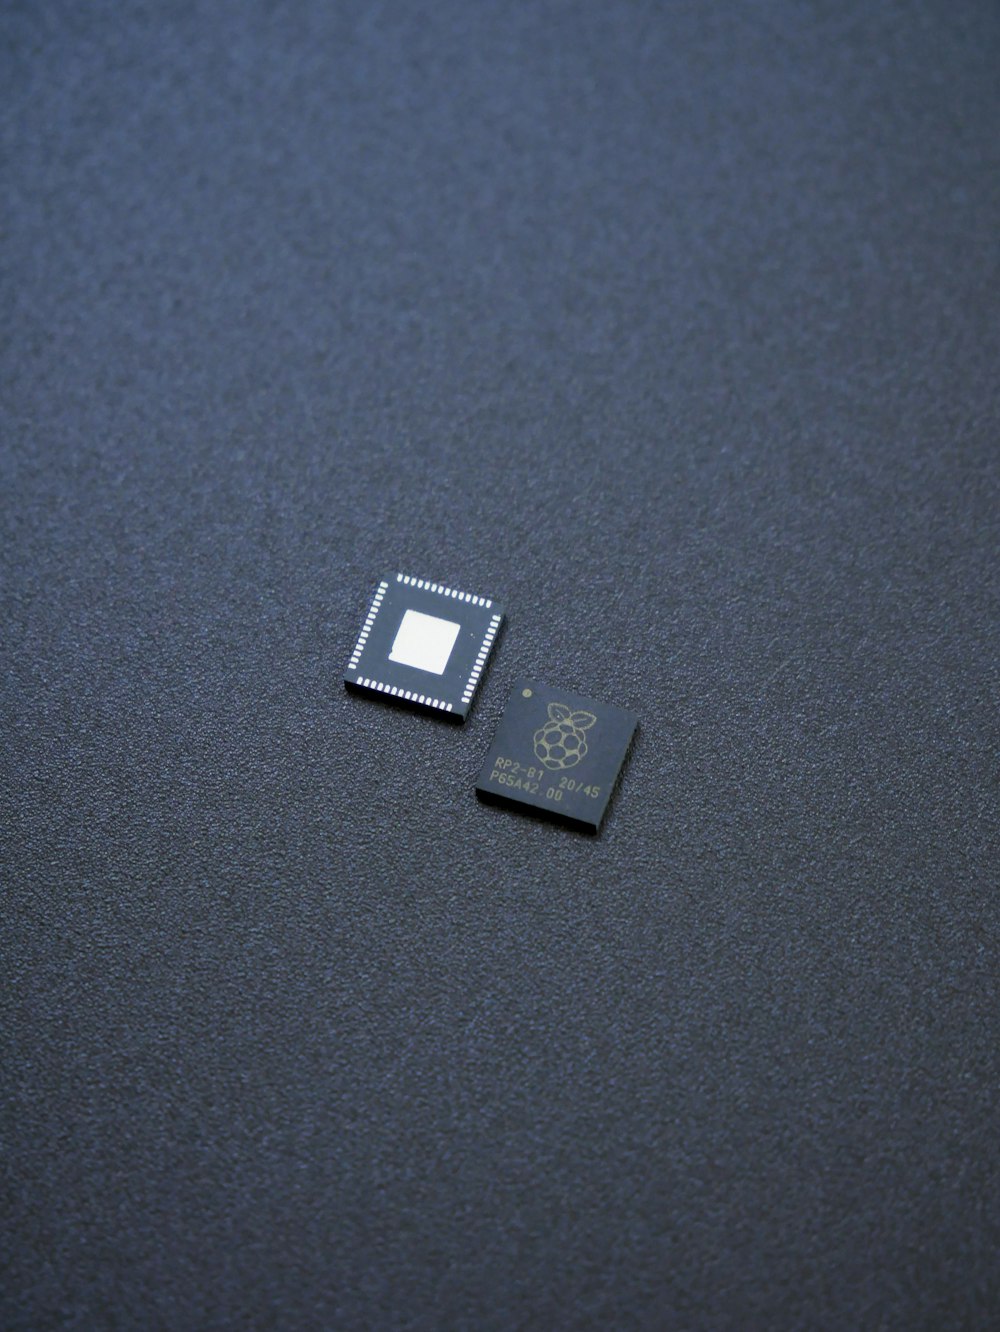 a micro processor chip sitting on top of a table